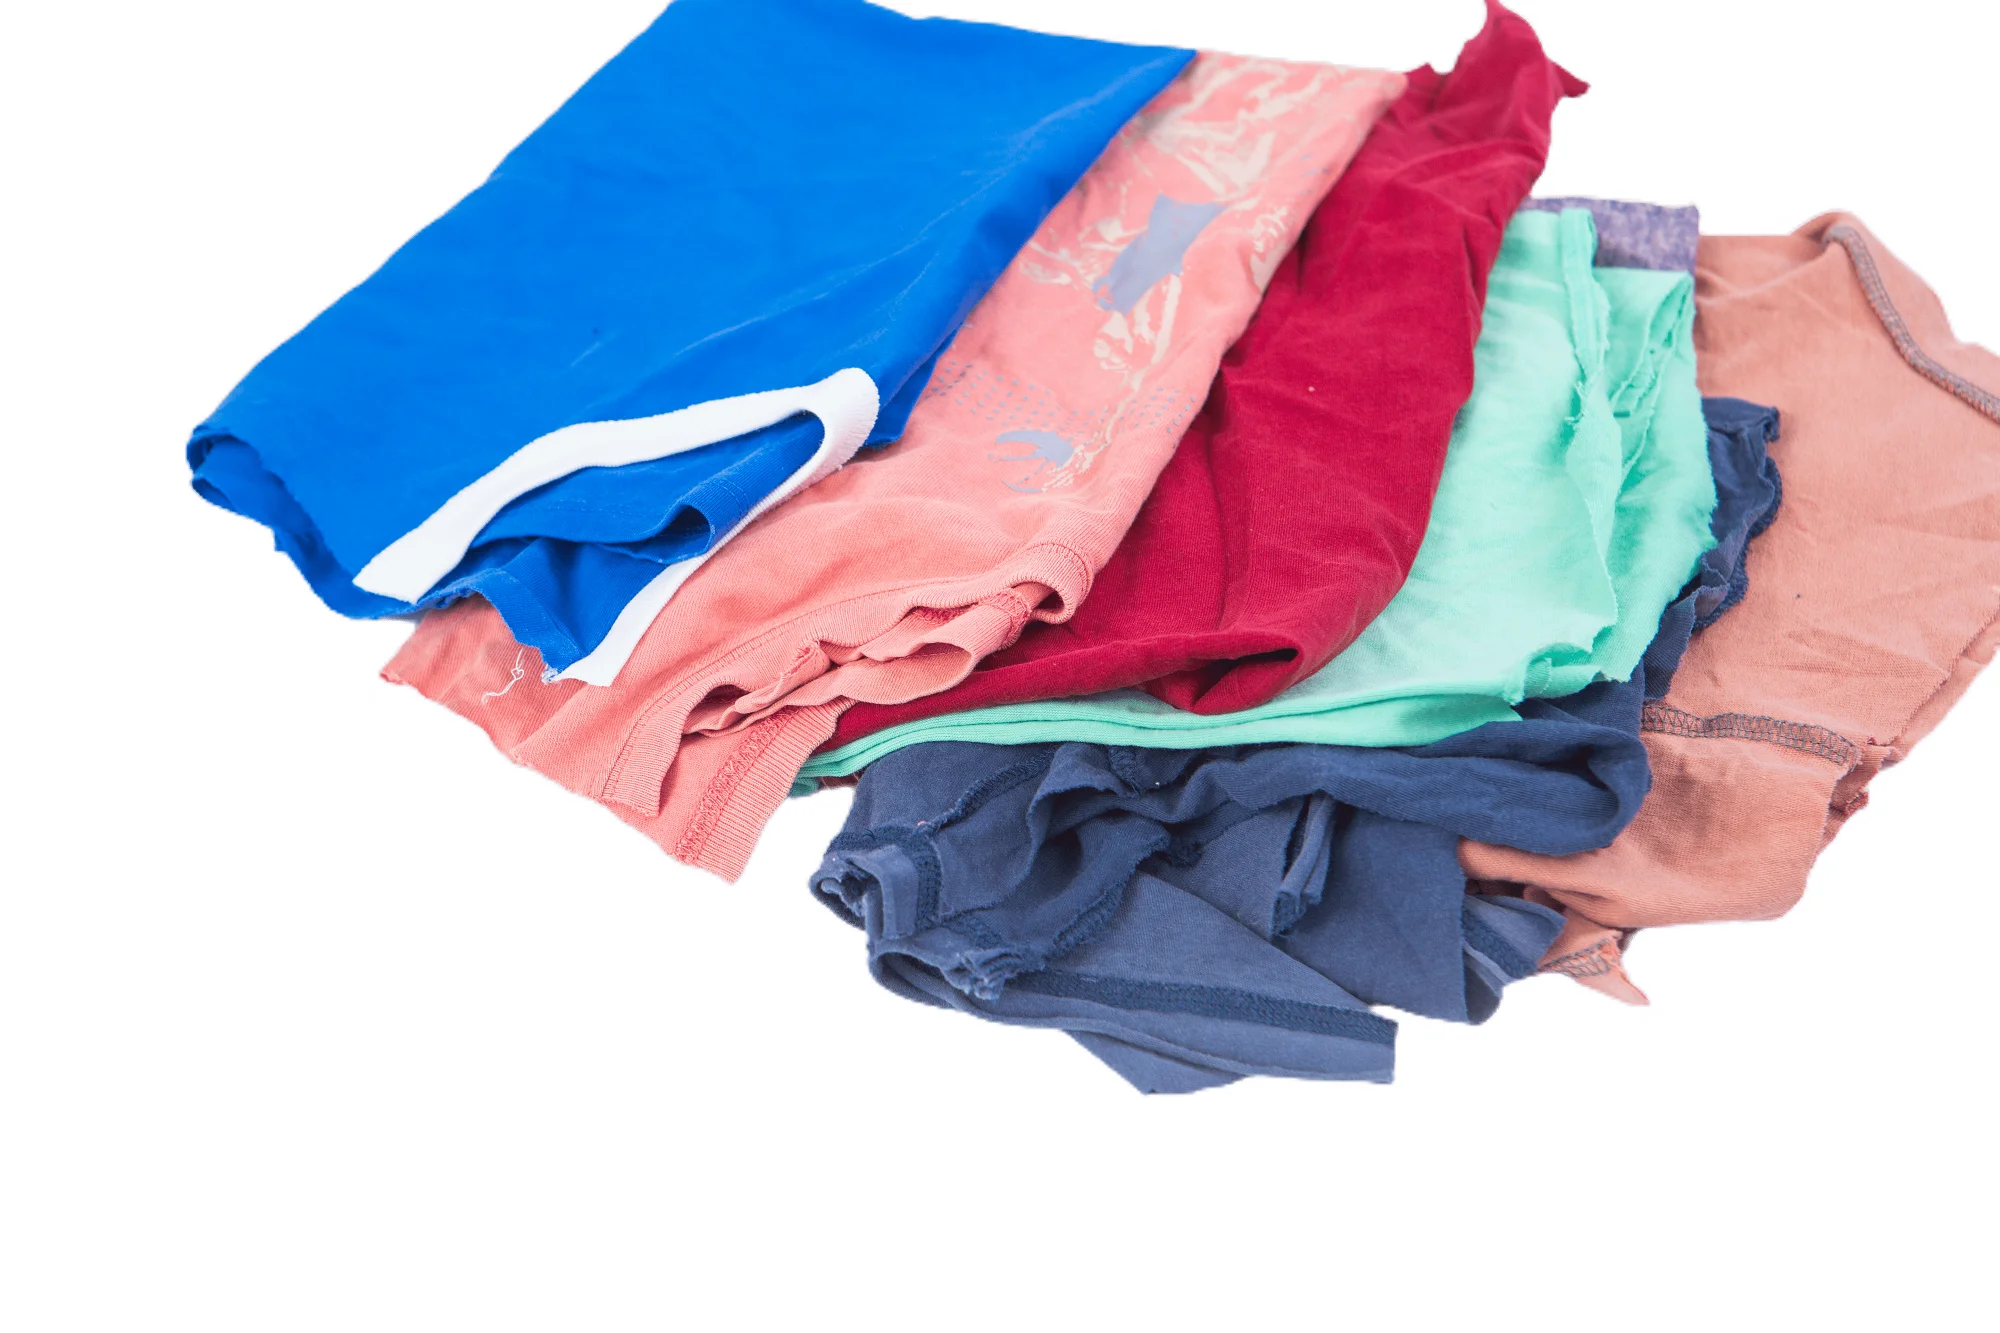 B Grade Dark Coloured T-shirt Rags 100% Cotton Wiping Rag Textile Waste Recycled Cotton Cleaning Cloth Used Rag KGs